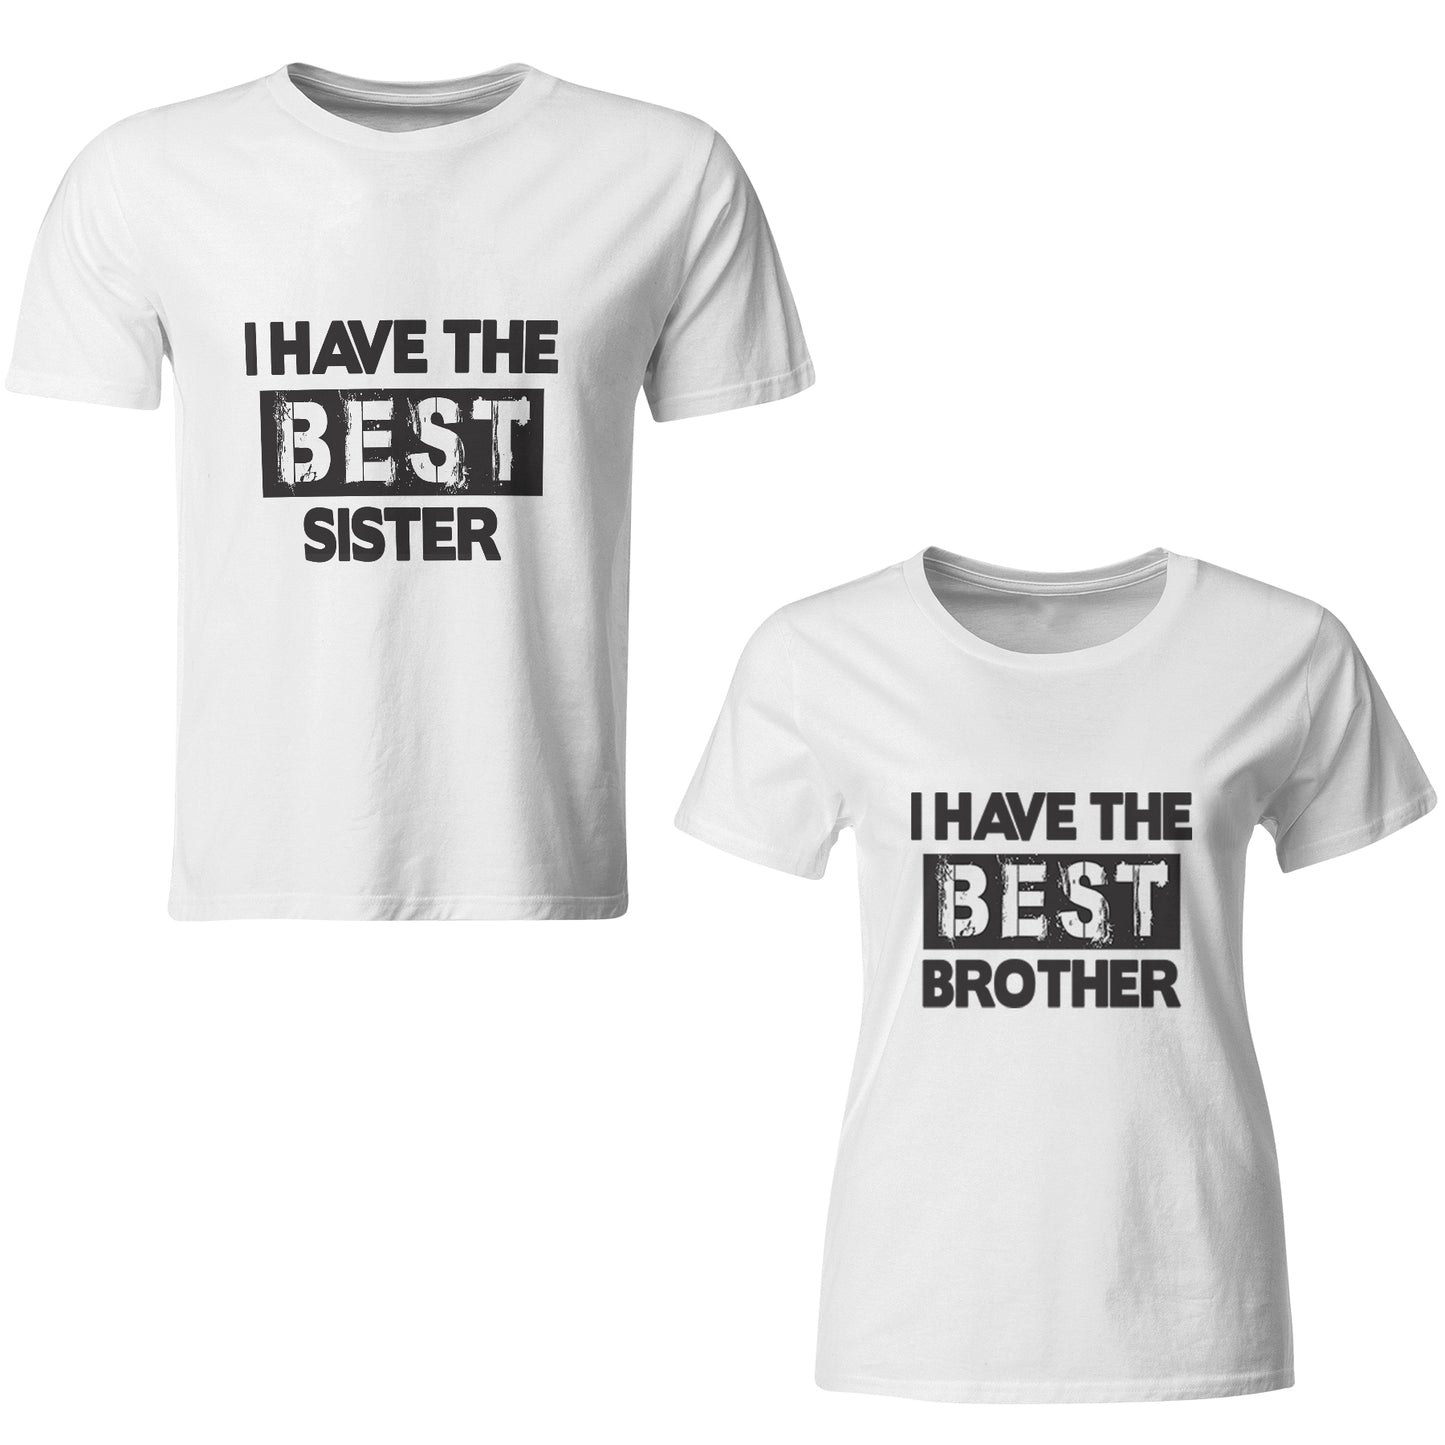 I have the best brother-I have the best sister matching Sibling t shirts - white